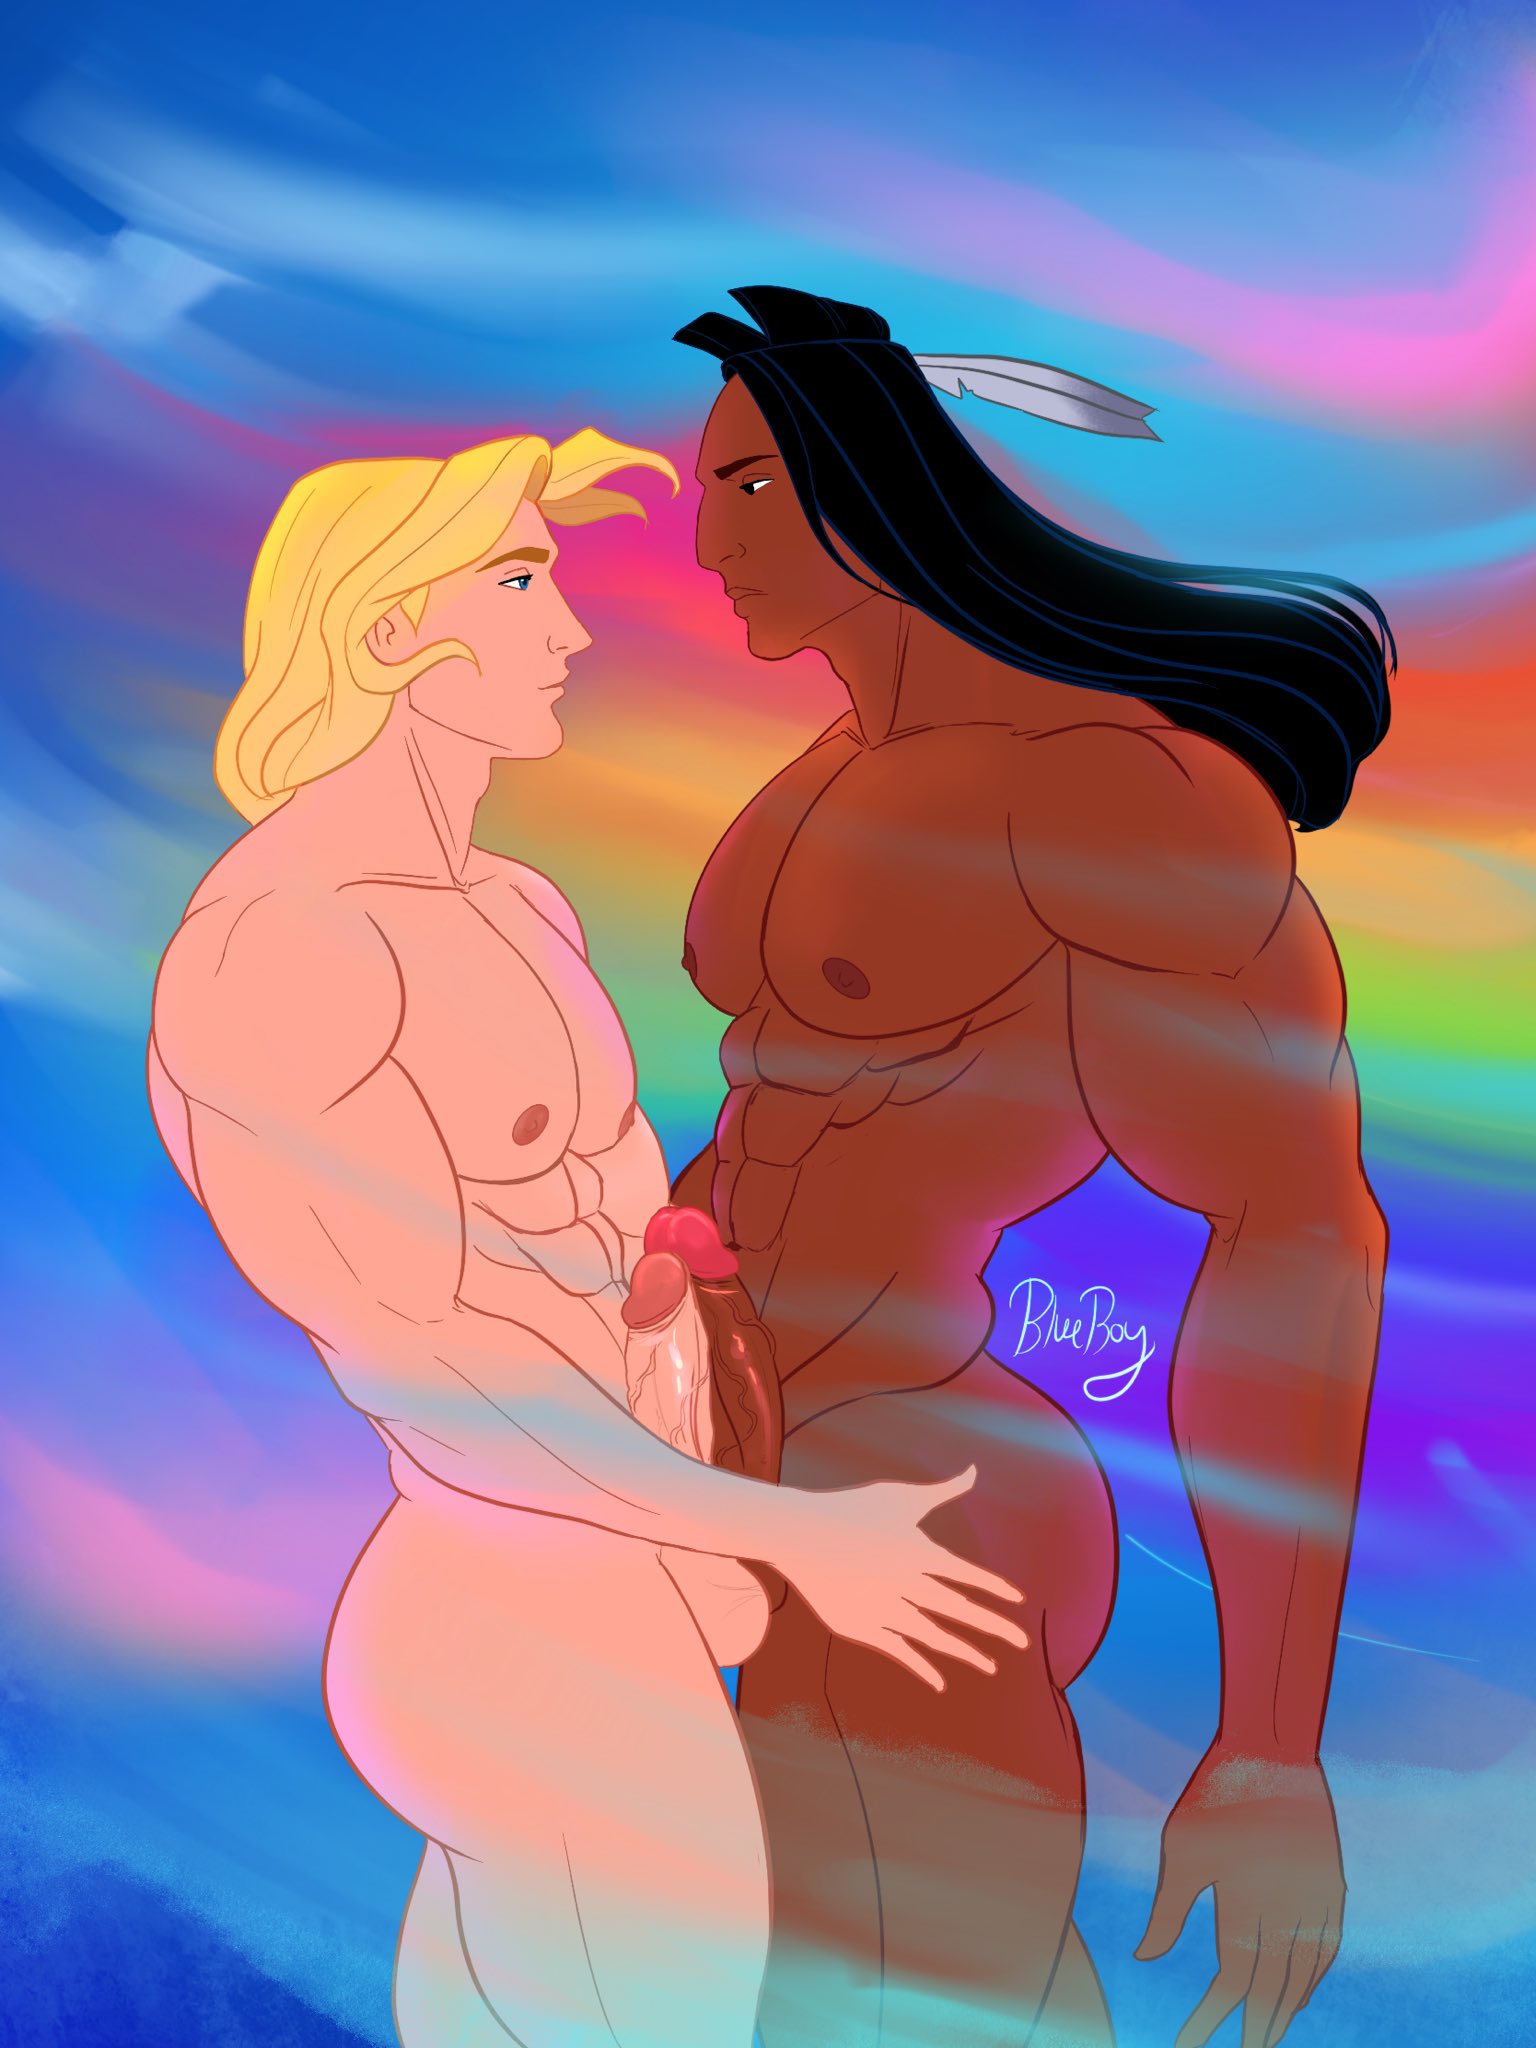 Pocahontas Gay Porn - Rule34 - If it exists, there is porn of it / john smith, kocoum / 7026183